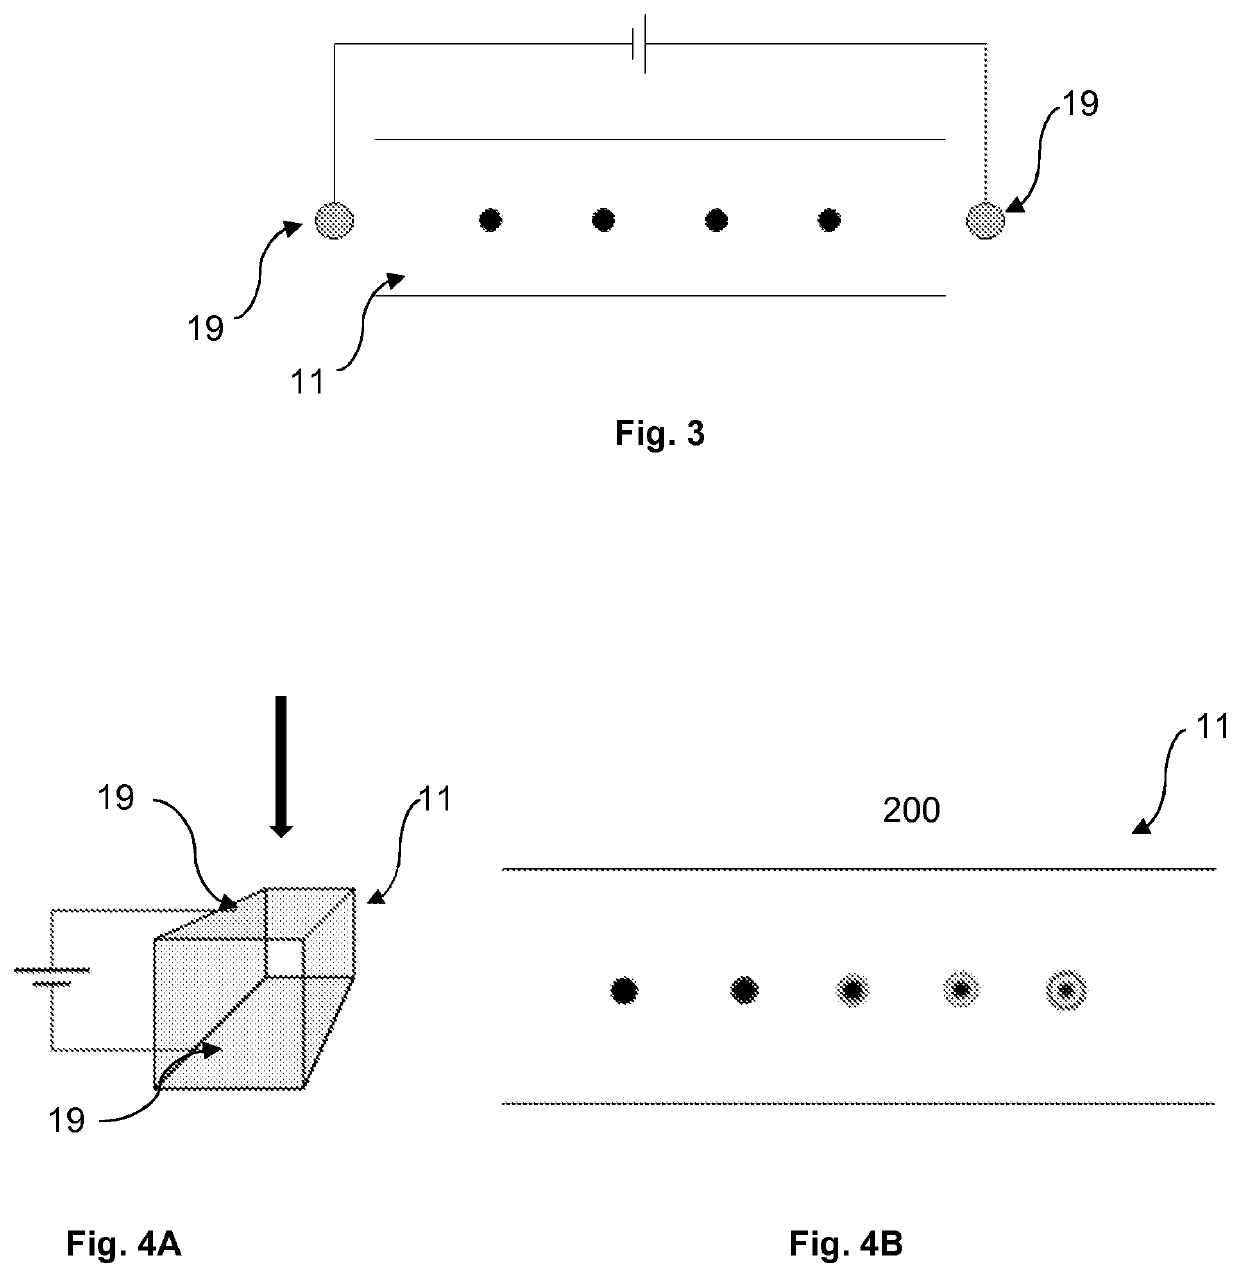 Method for determining the electrophoretic mobility of emulsion droplets